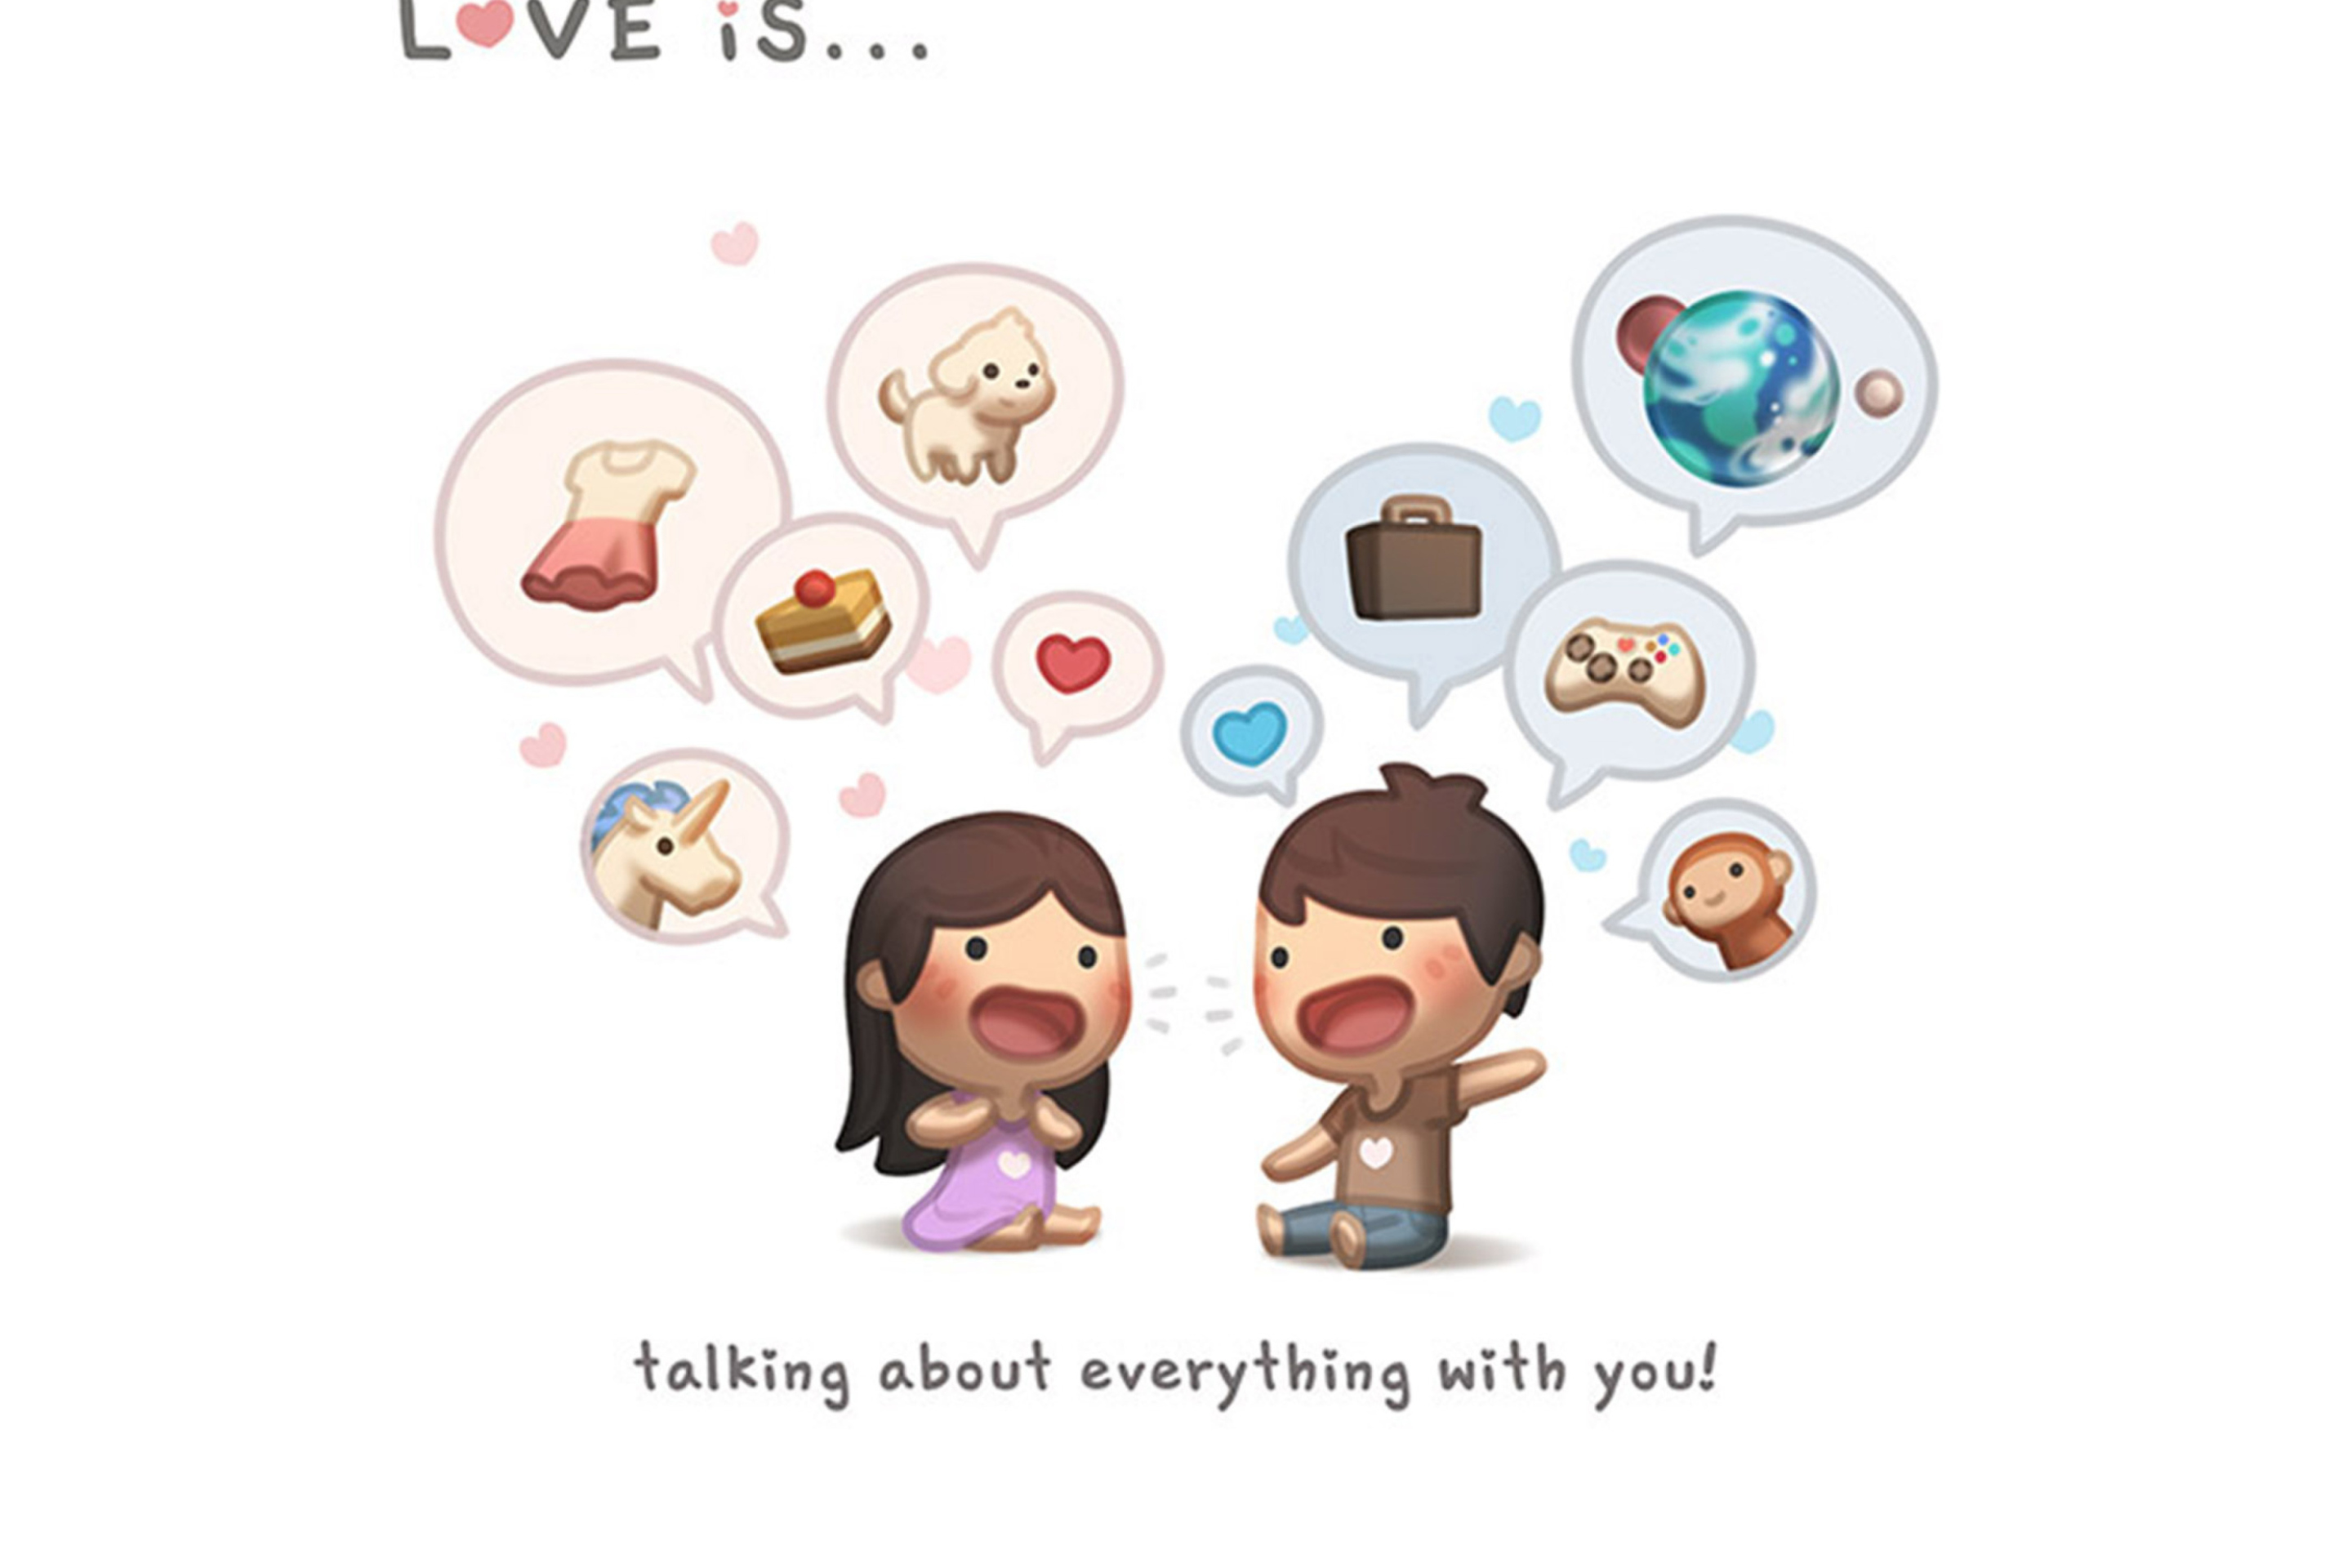 Love Is - Talking About Everything With You screenshot #1 2880x1920